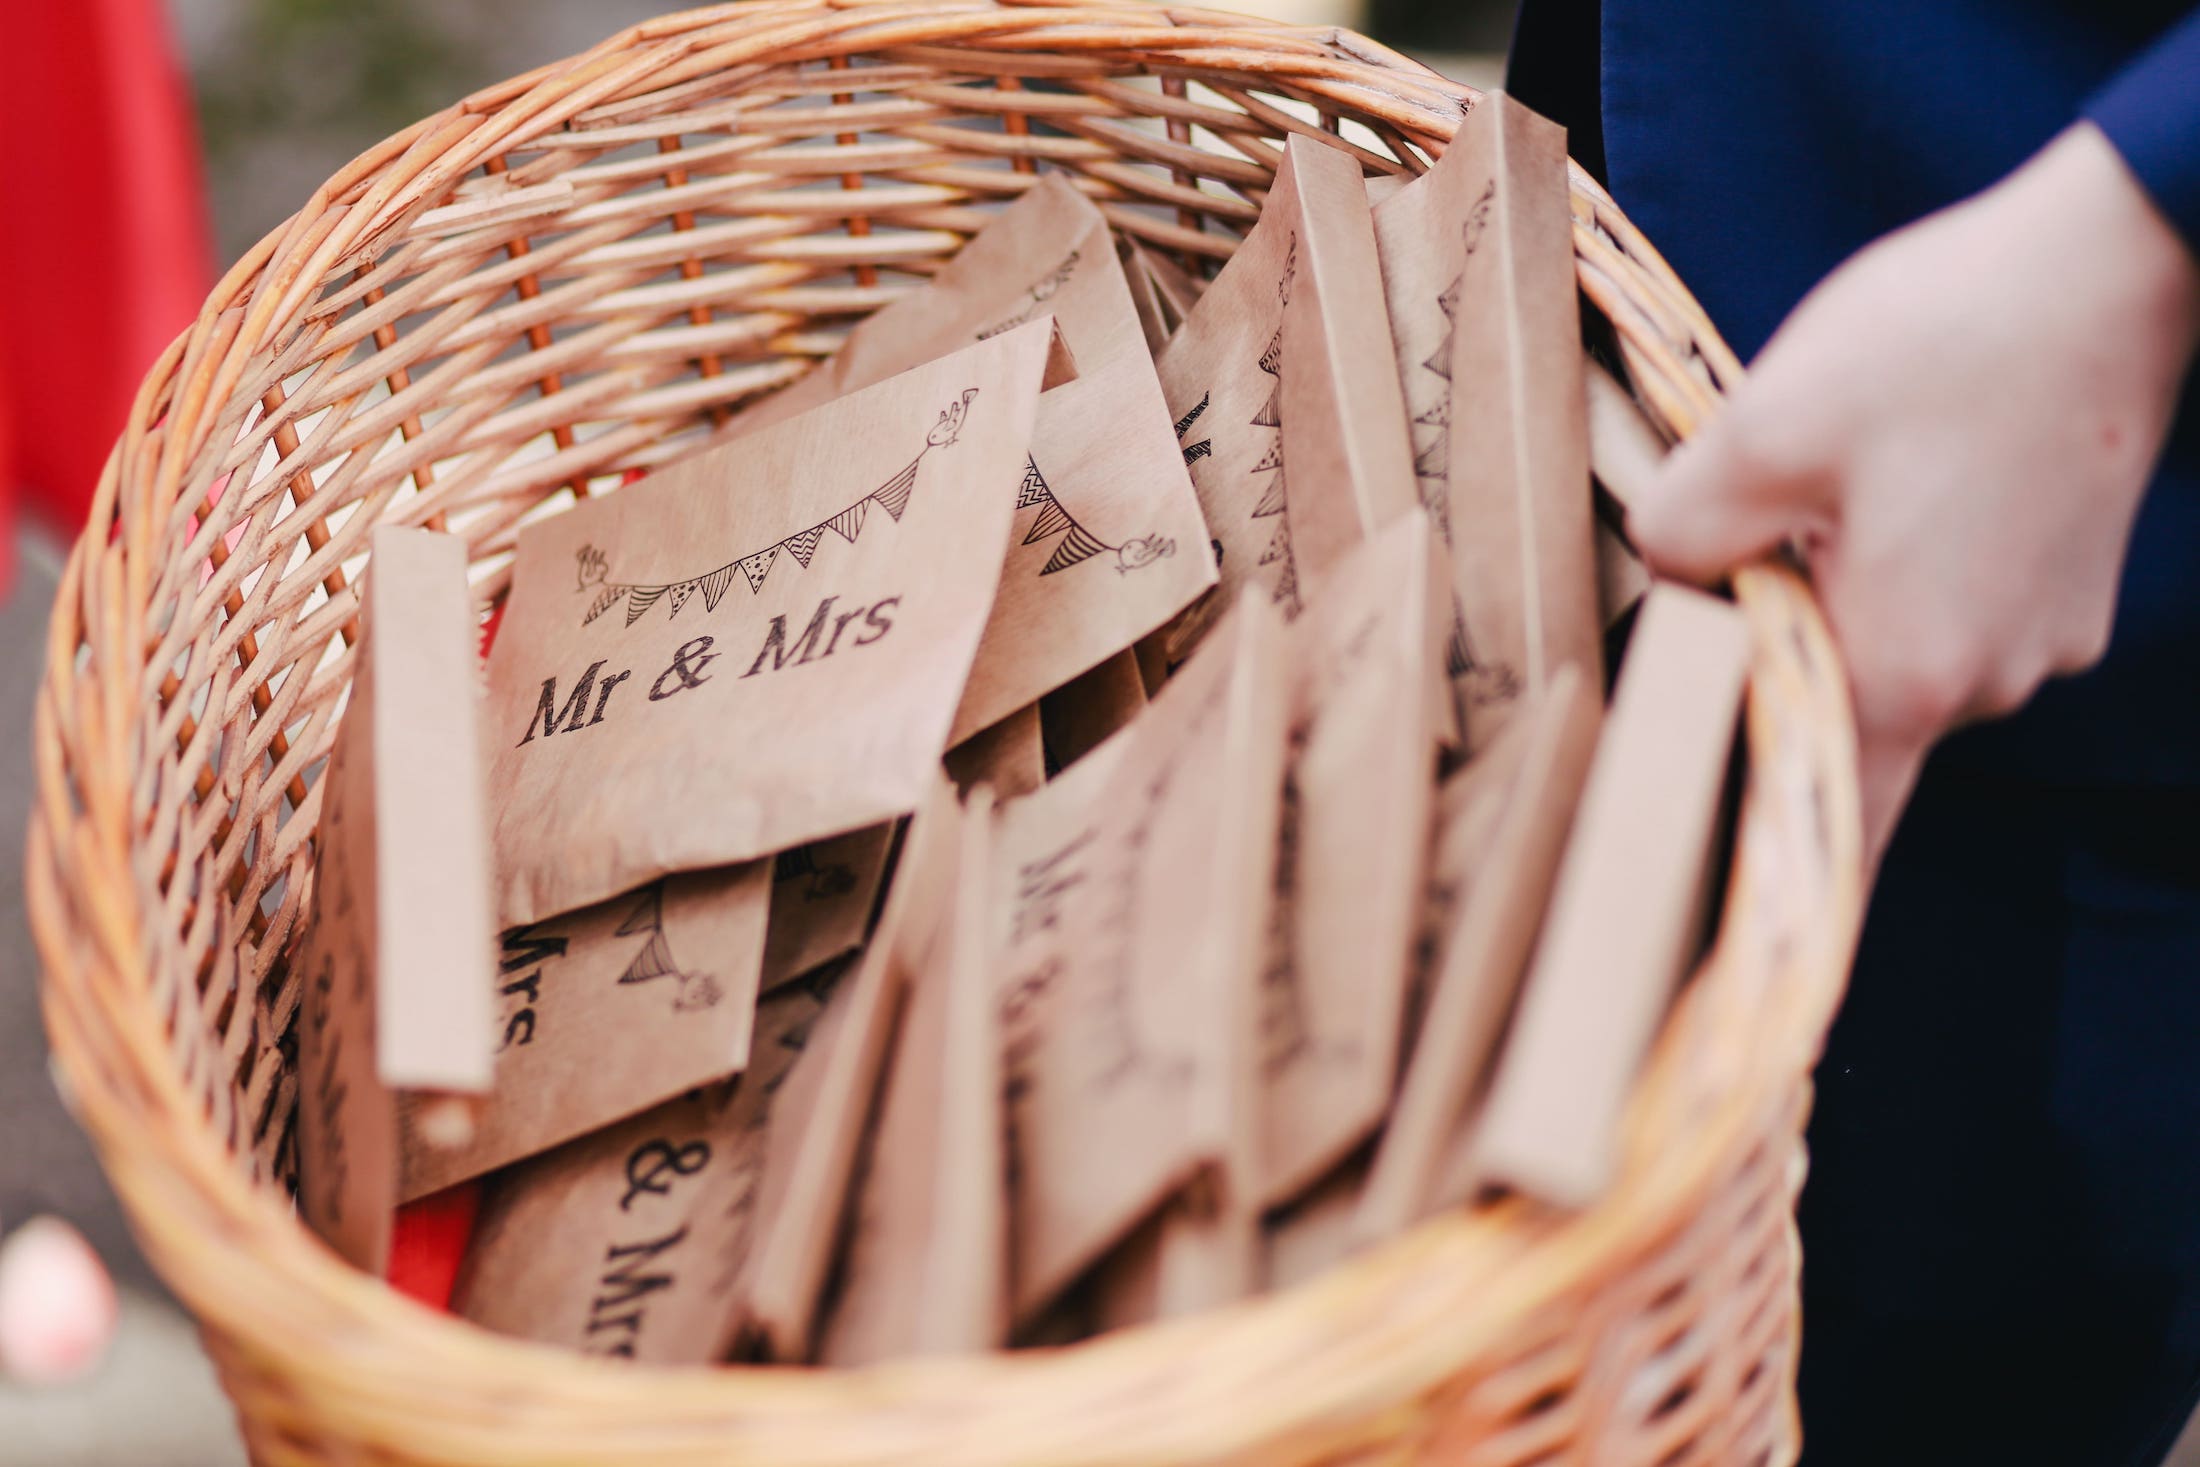 Marriage advice cards in a basket